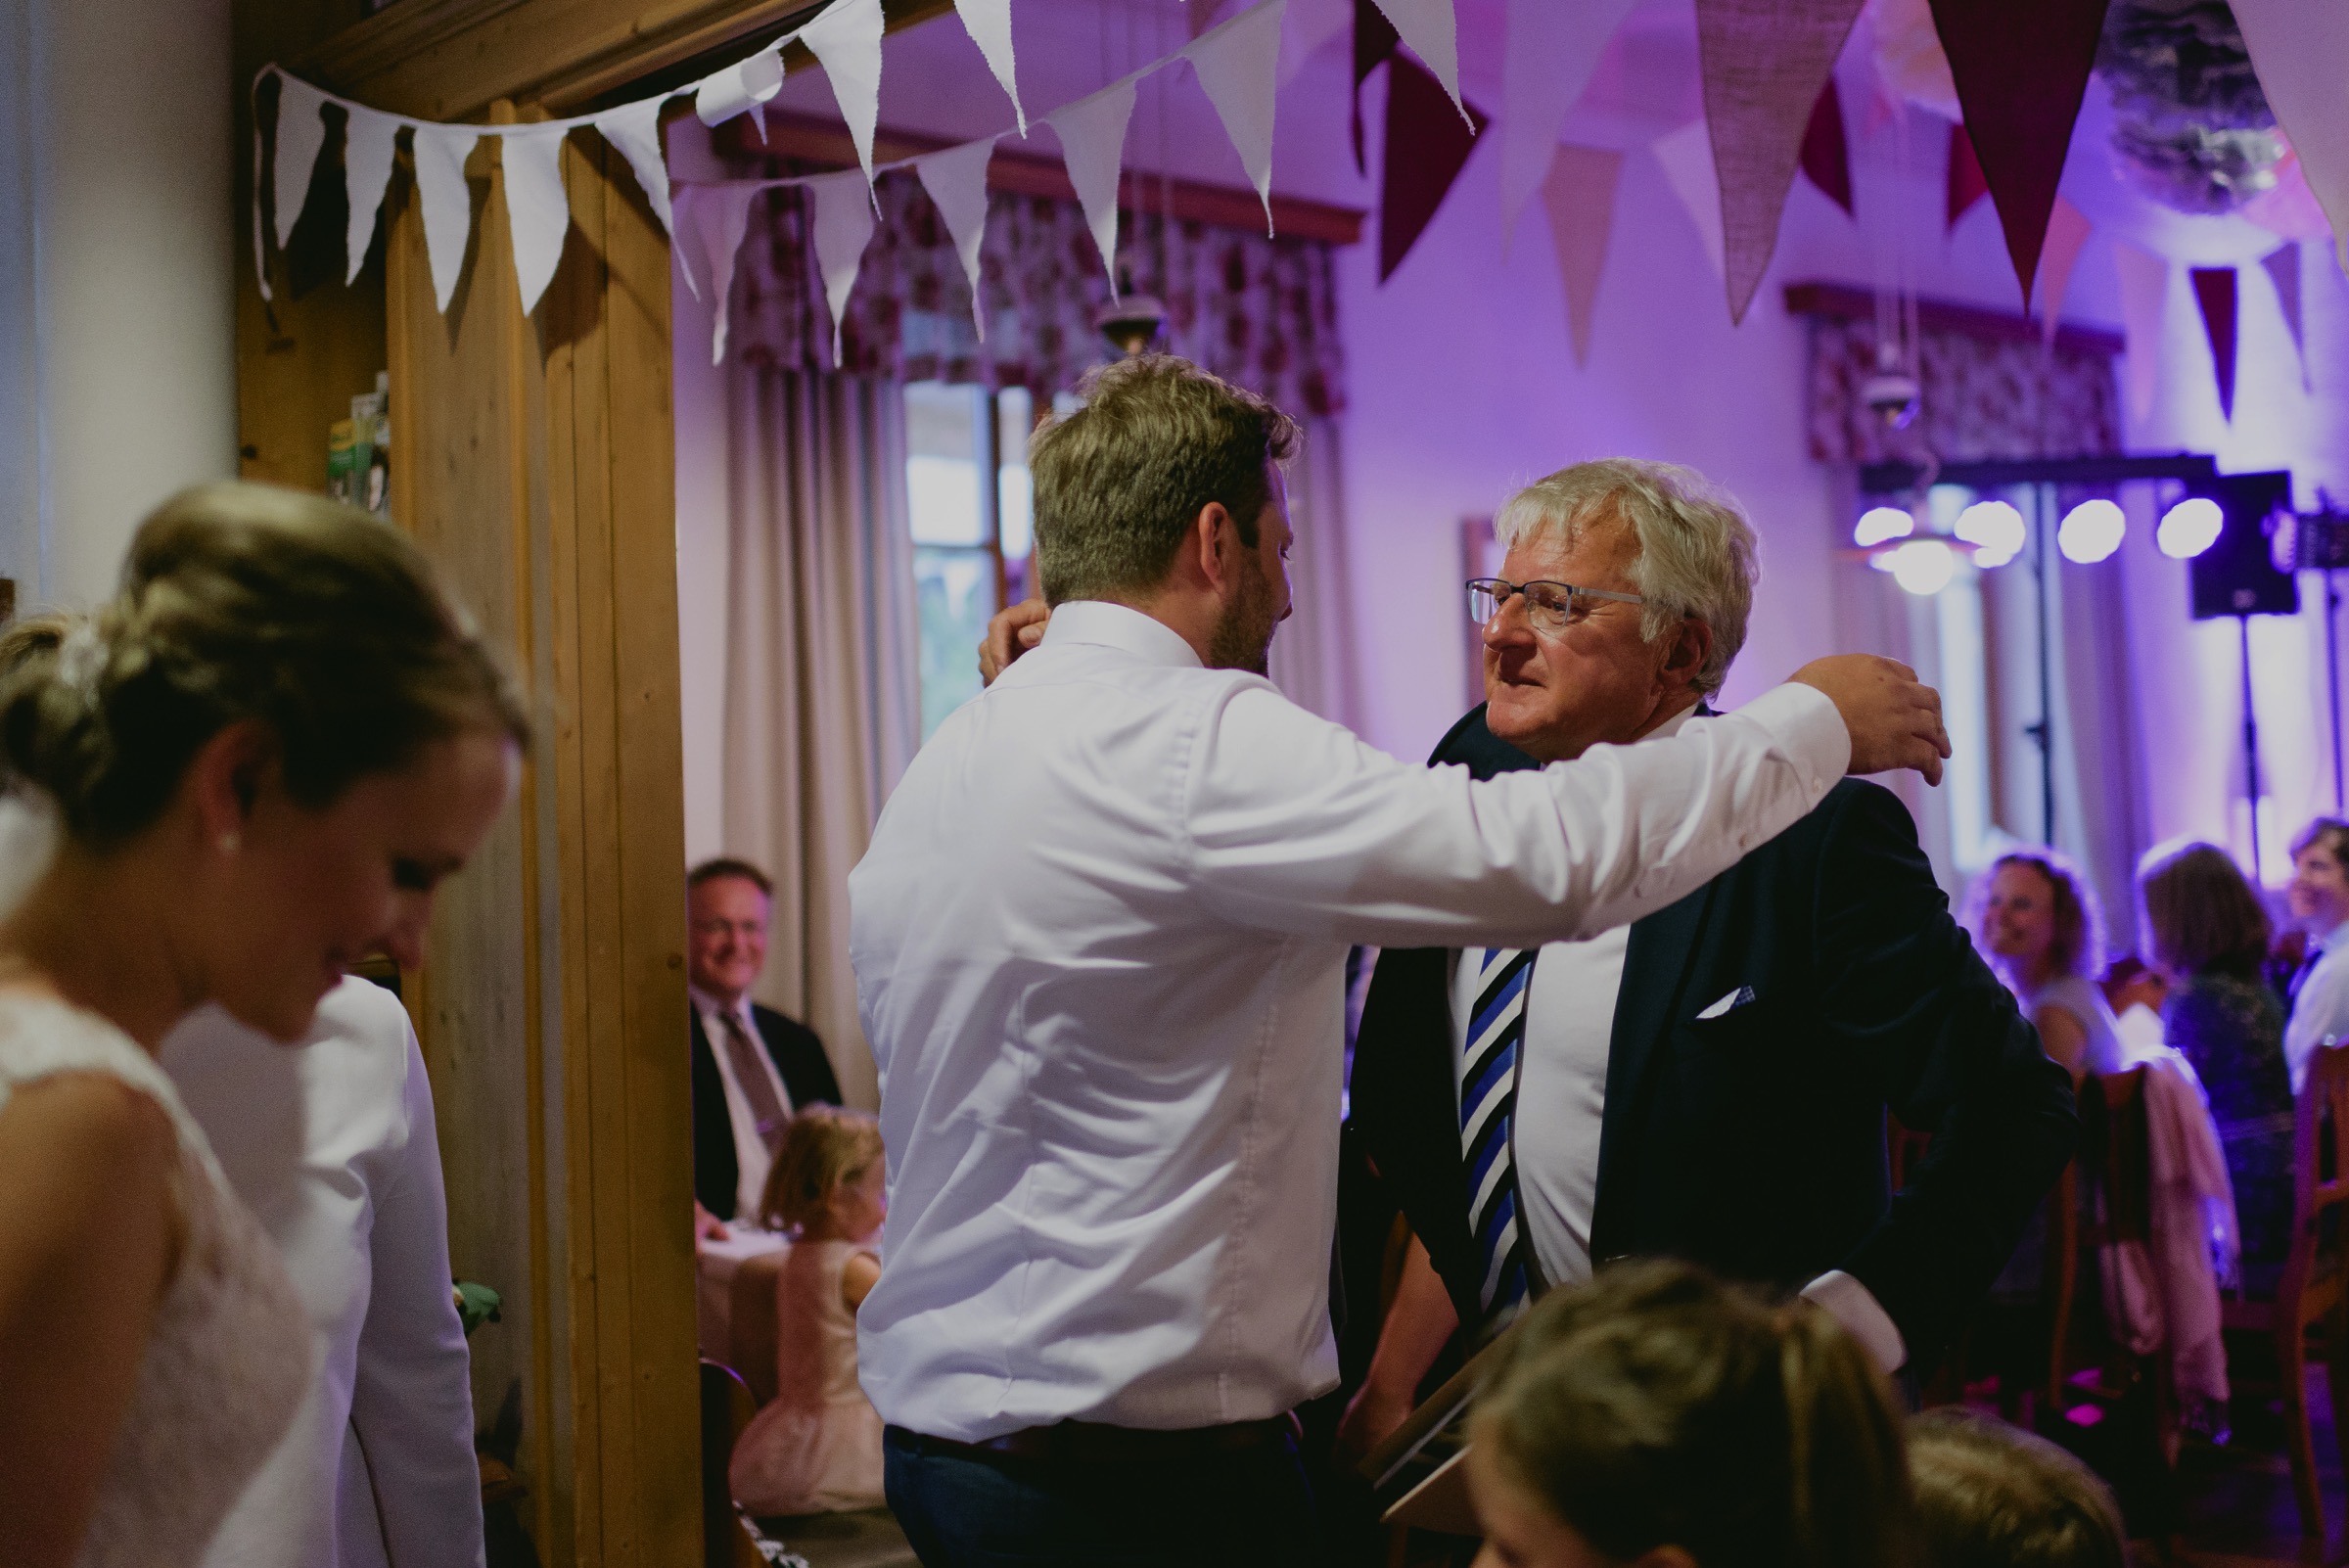 father and son moment at the wedding in austria